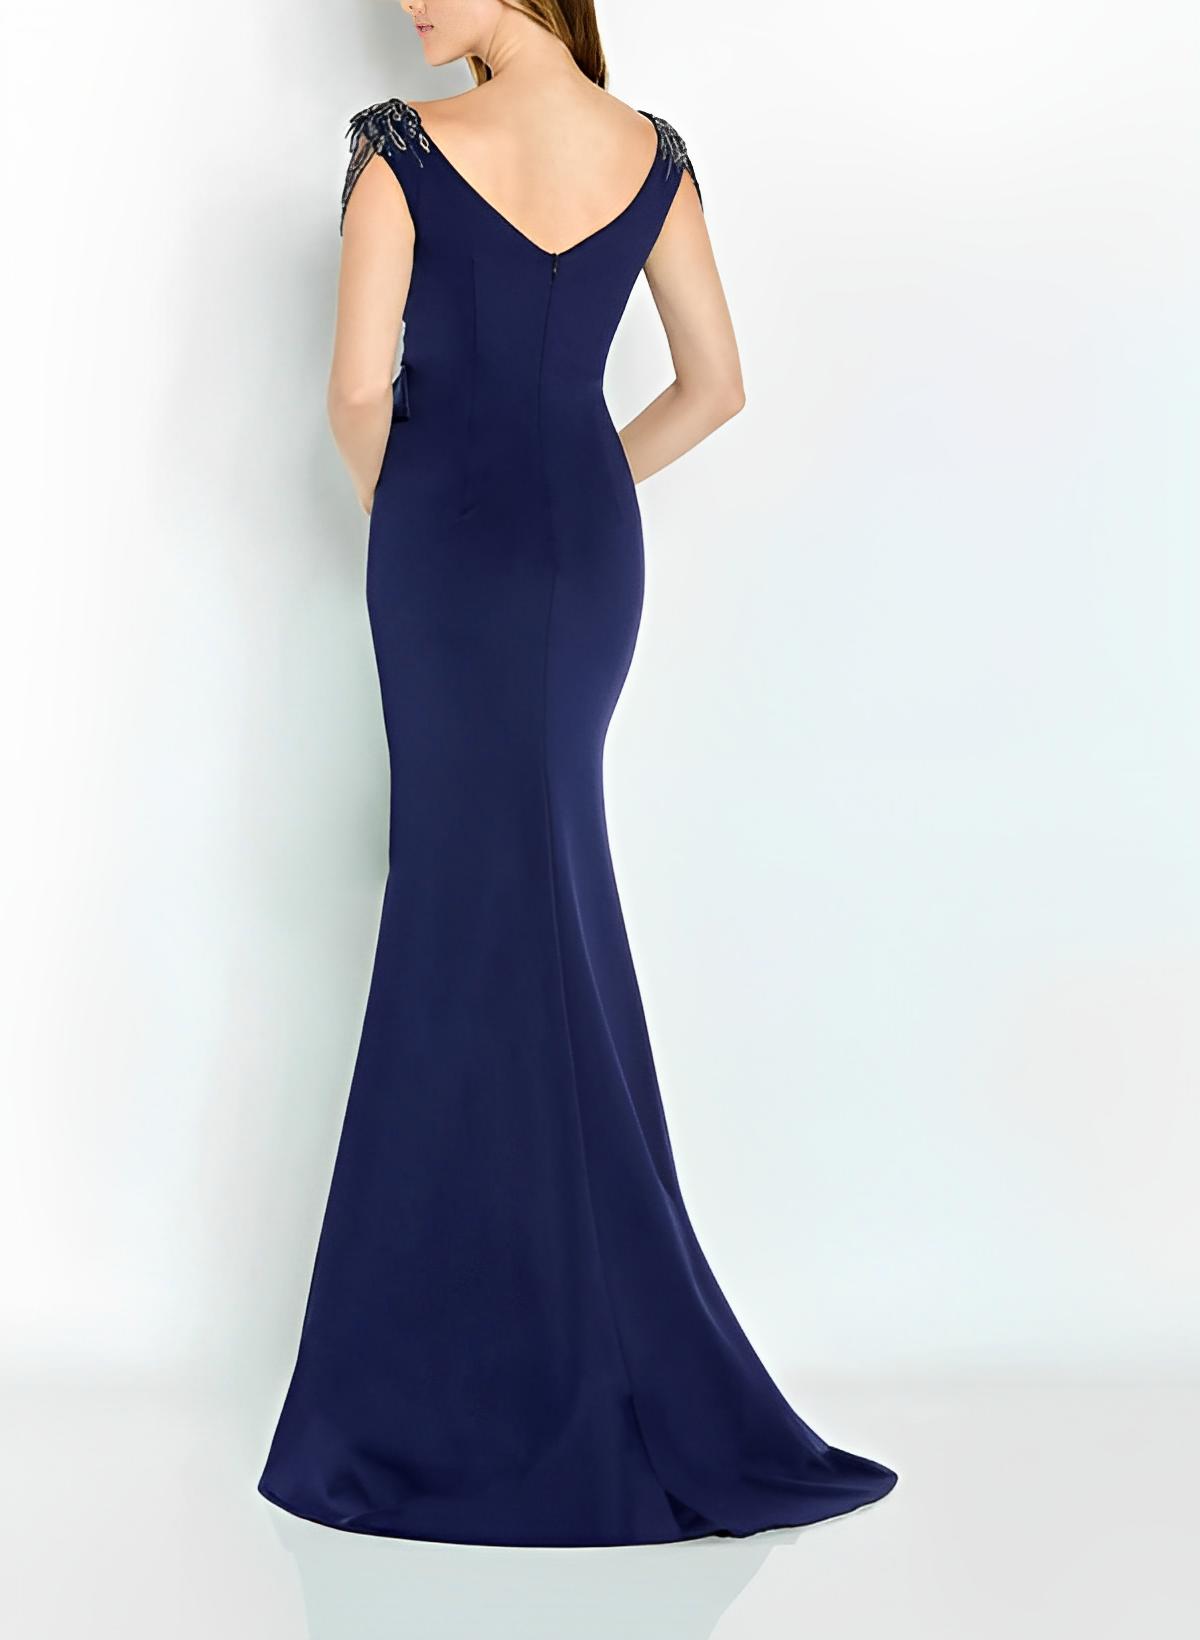 V-Neck Sleeveless Floor-Length Mother Of The Bride Dresses With Appliques Lace